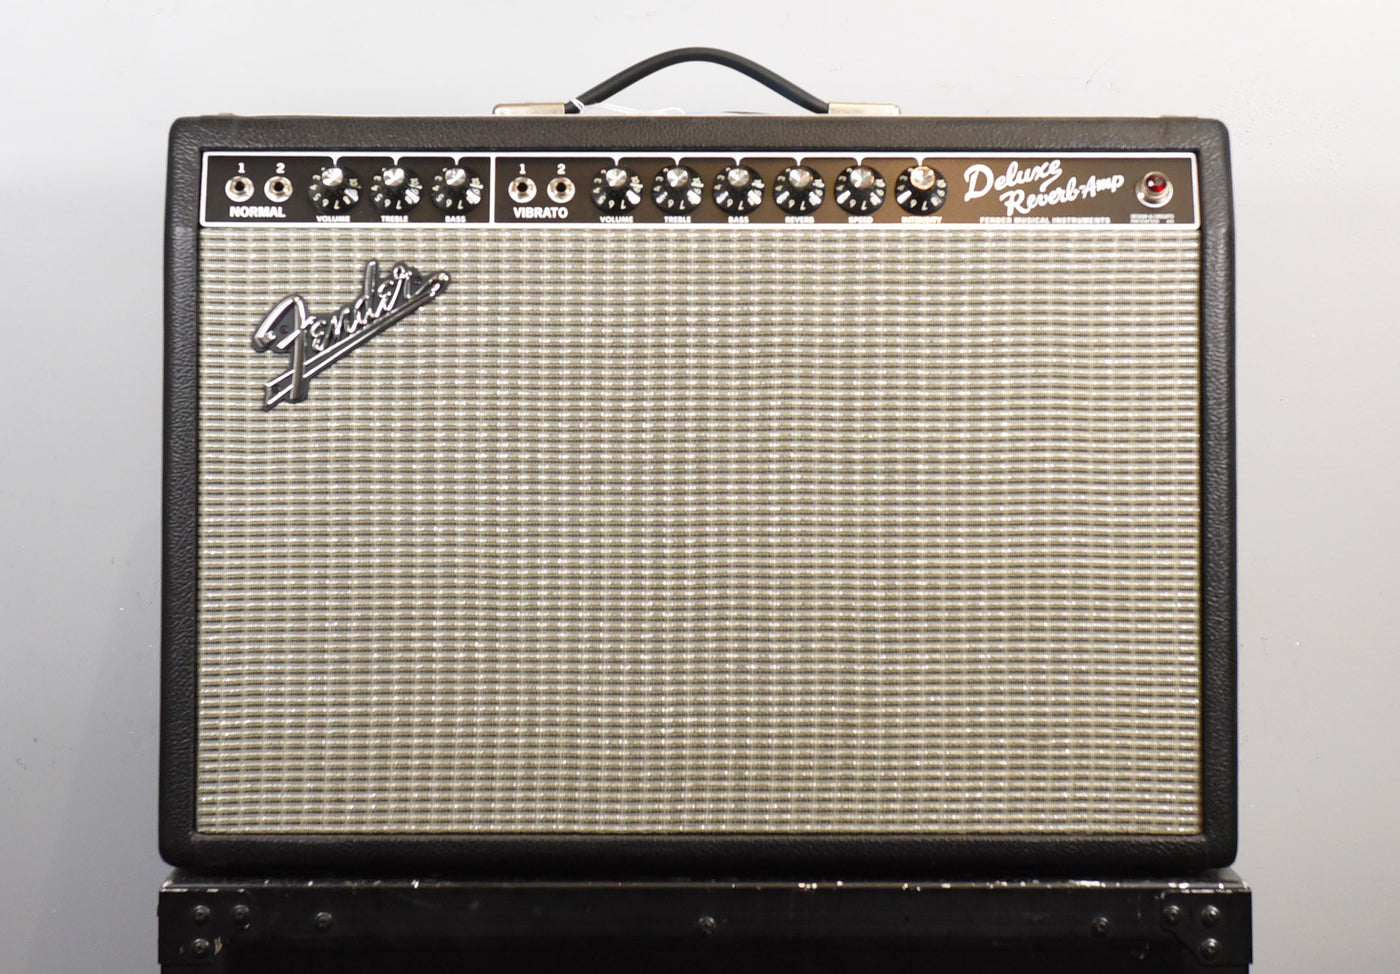 USED '65 Reissue Deluxe Reverb, '22